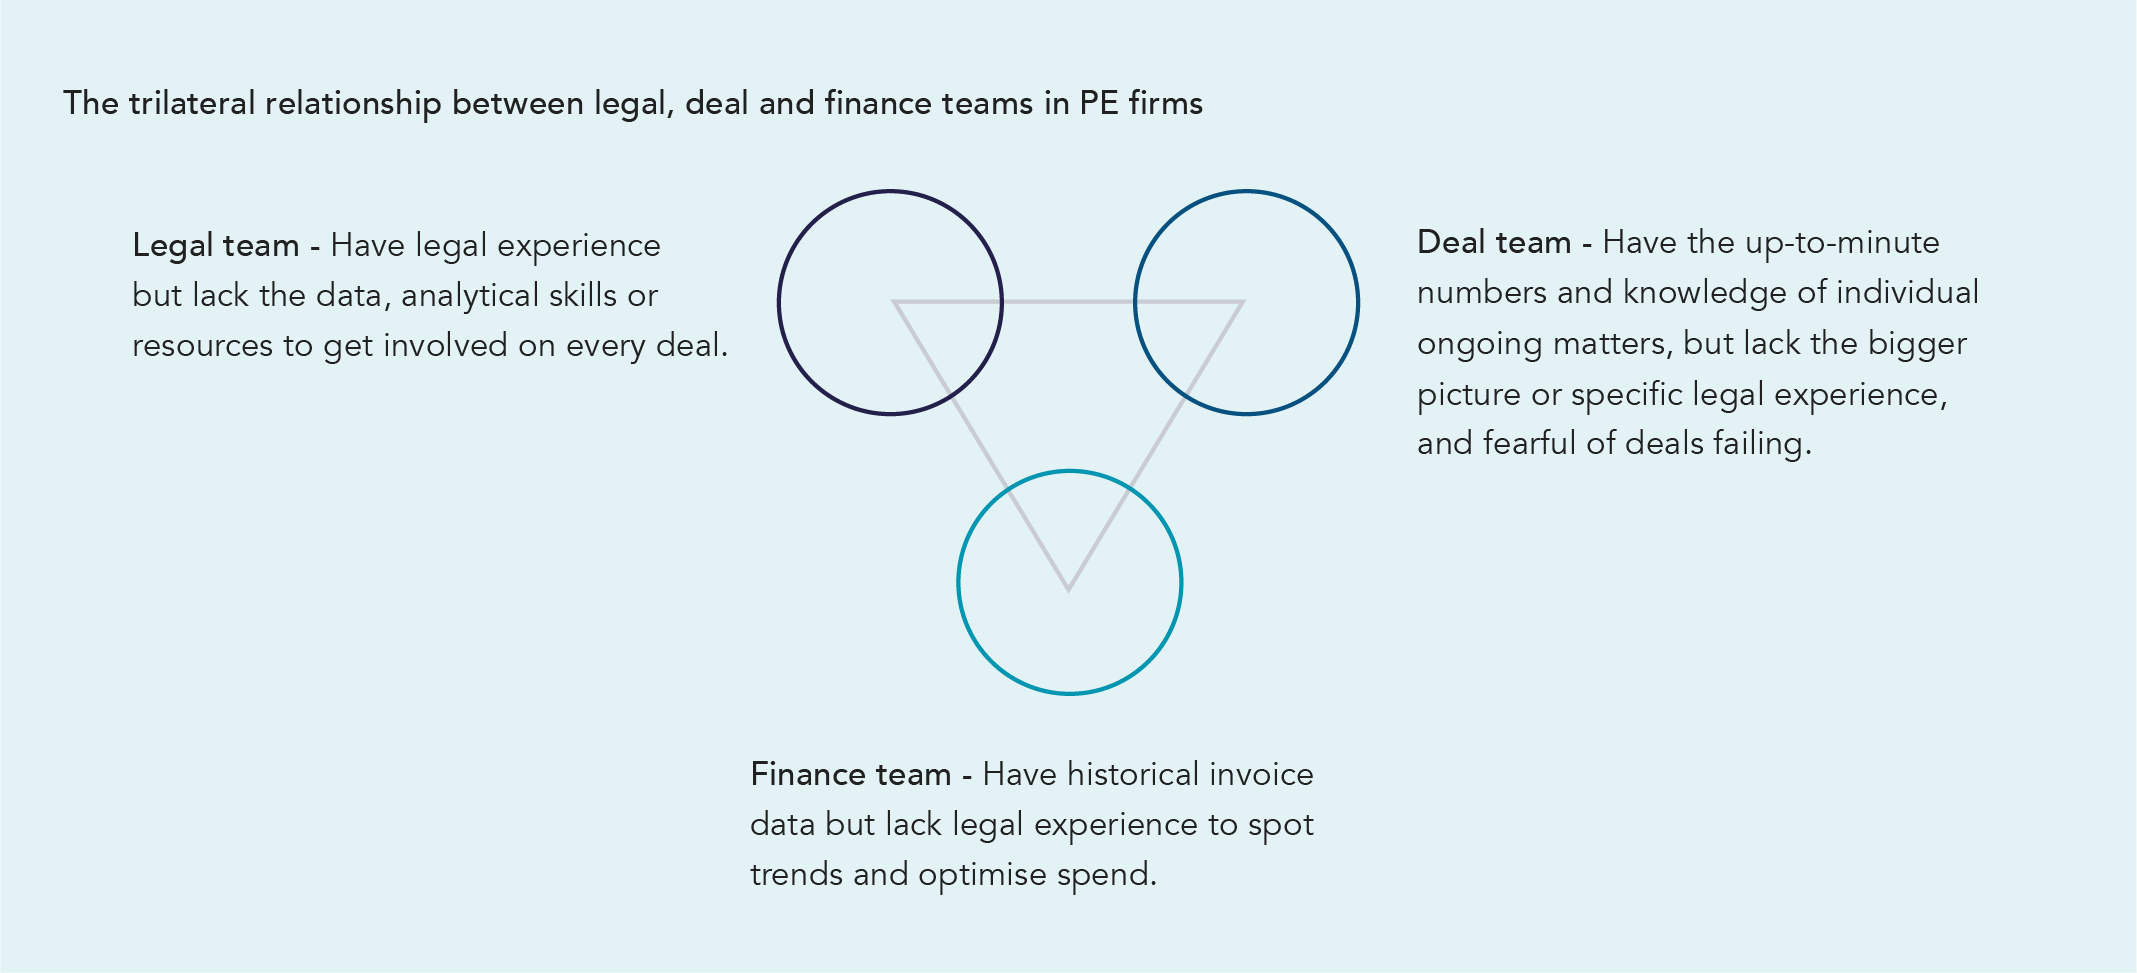 Legal, finance and deal teams form a trilateral relationship in PE